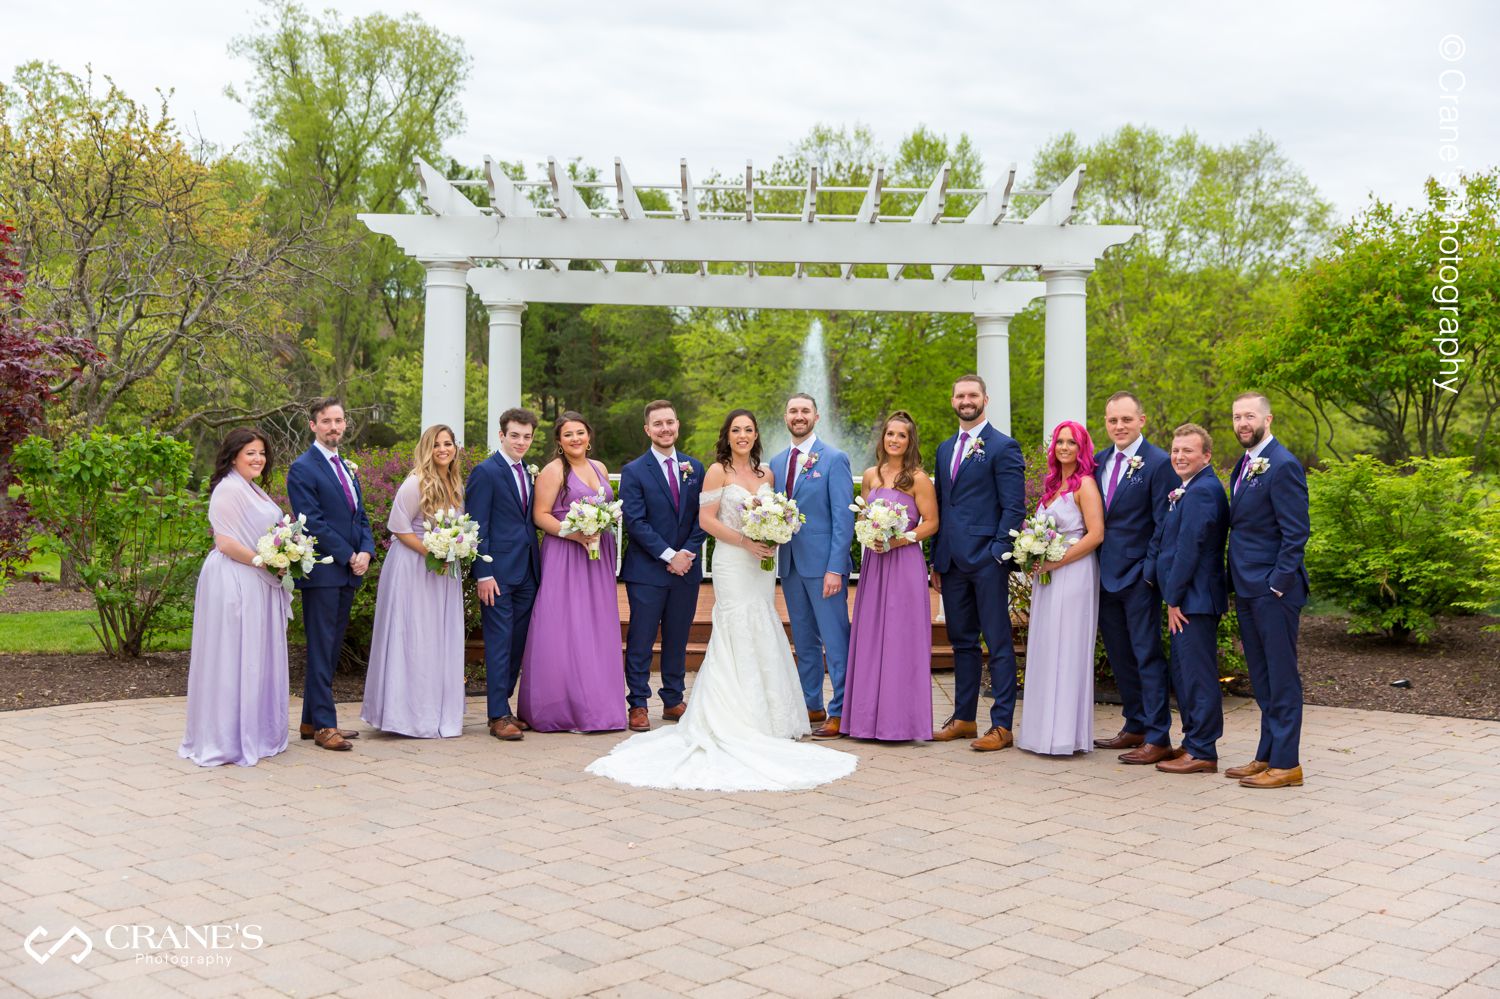 Wedding party photo outside Concorde Banquets in Kildeer, IL